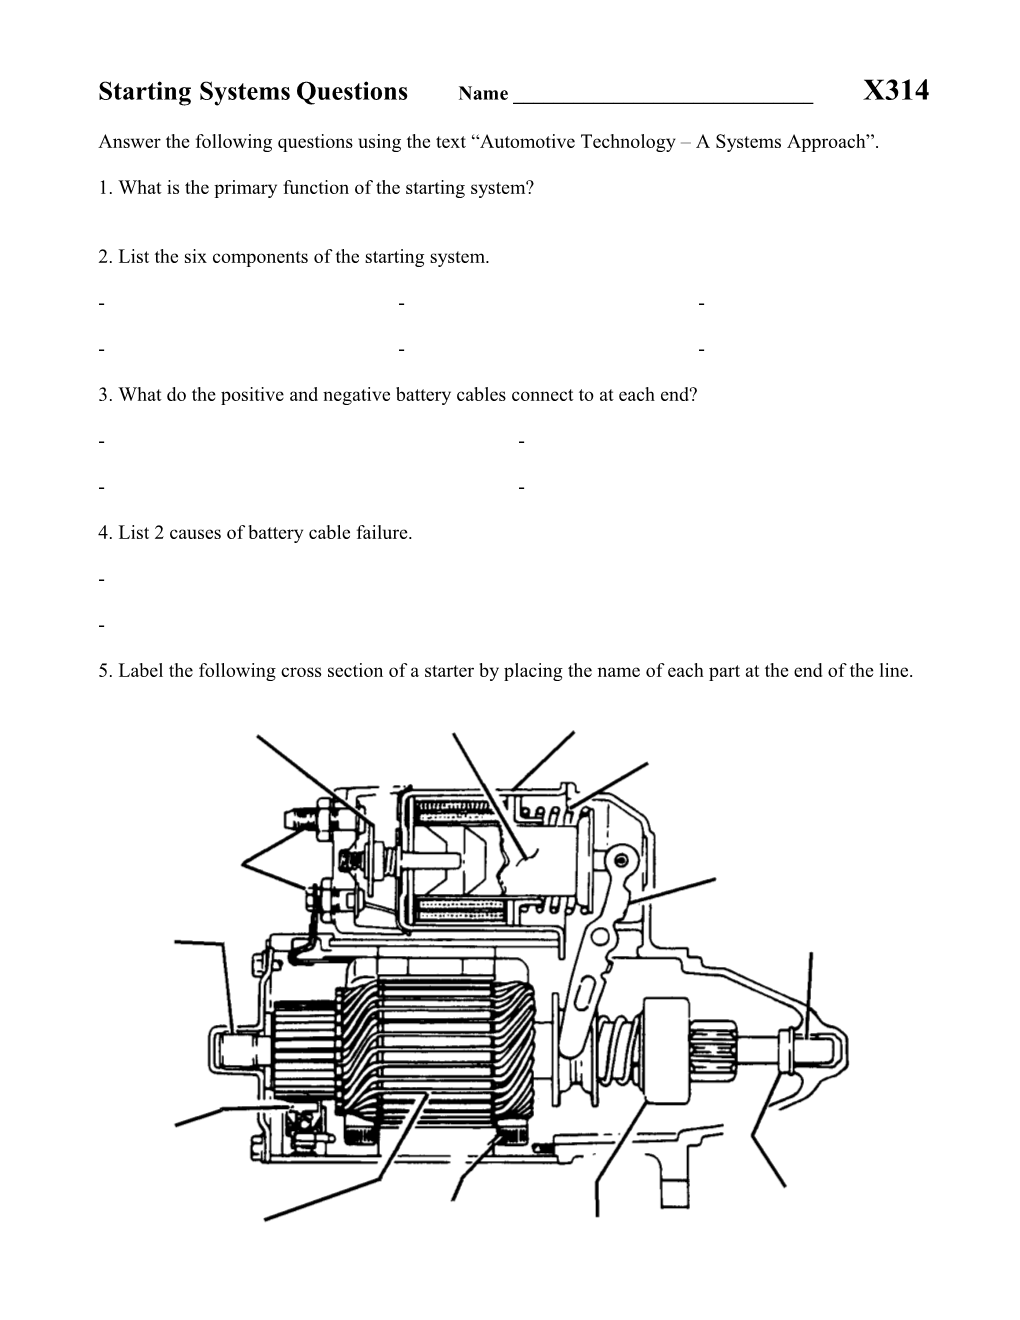 Answer the Following Questions Using the Text Automotive Technology a Systems Approach